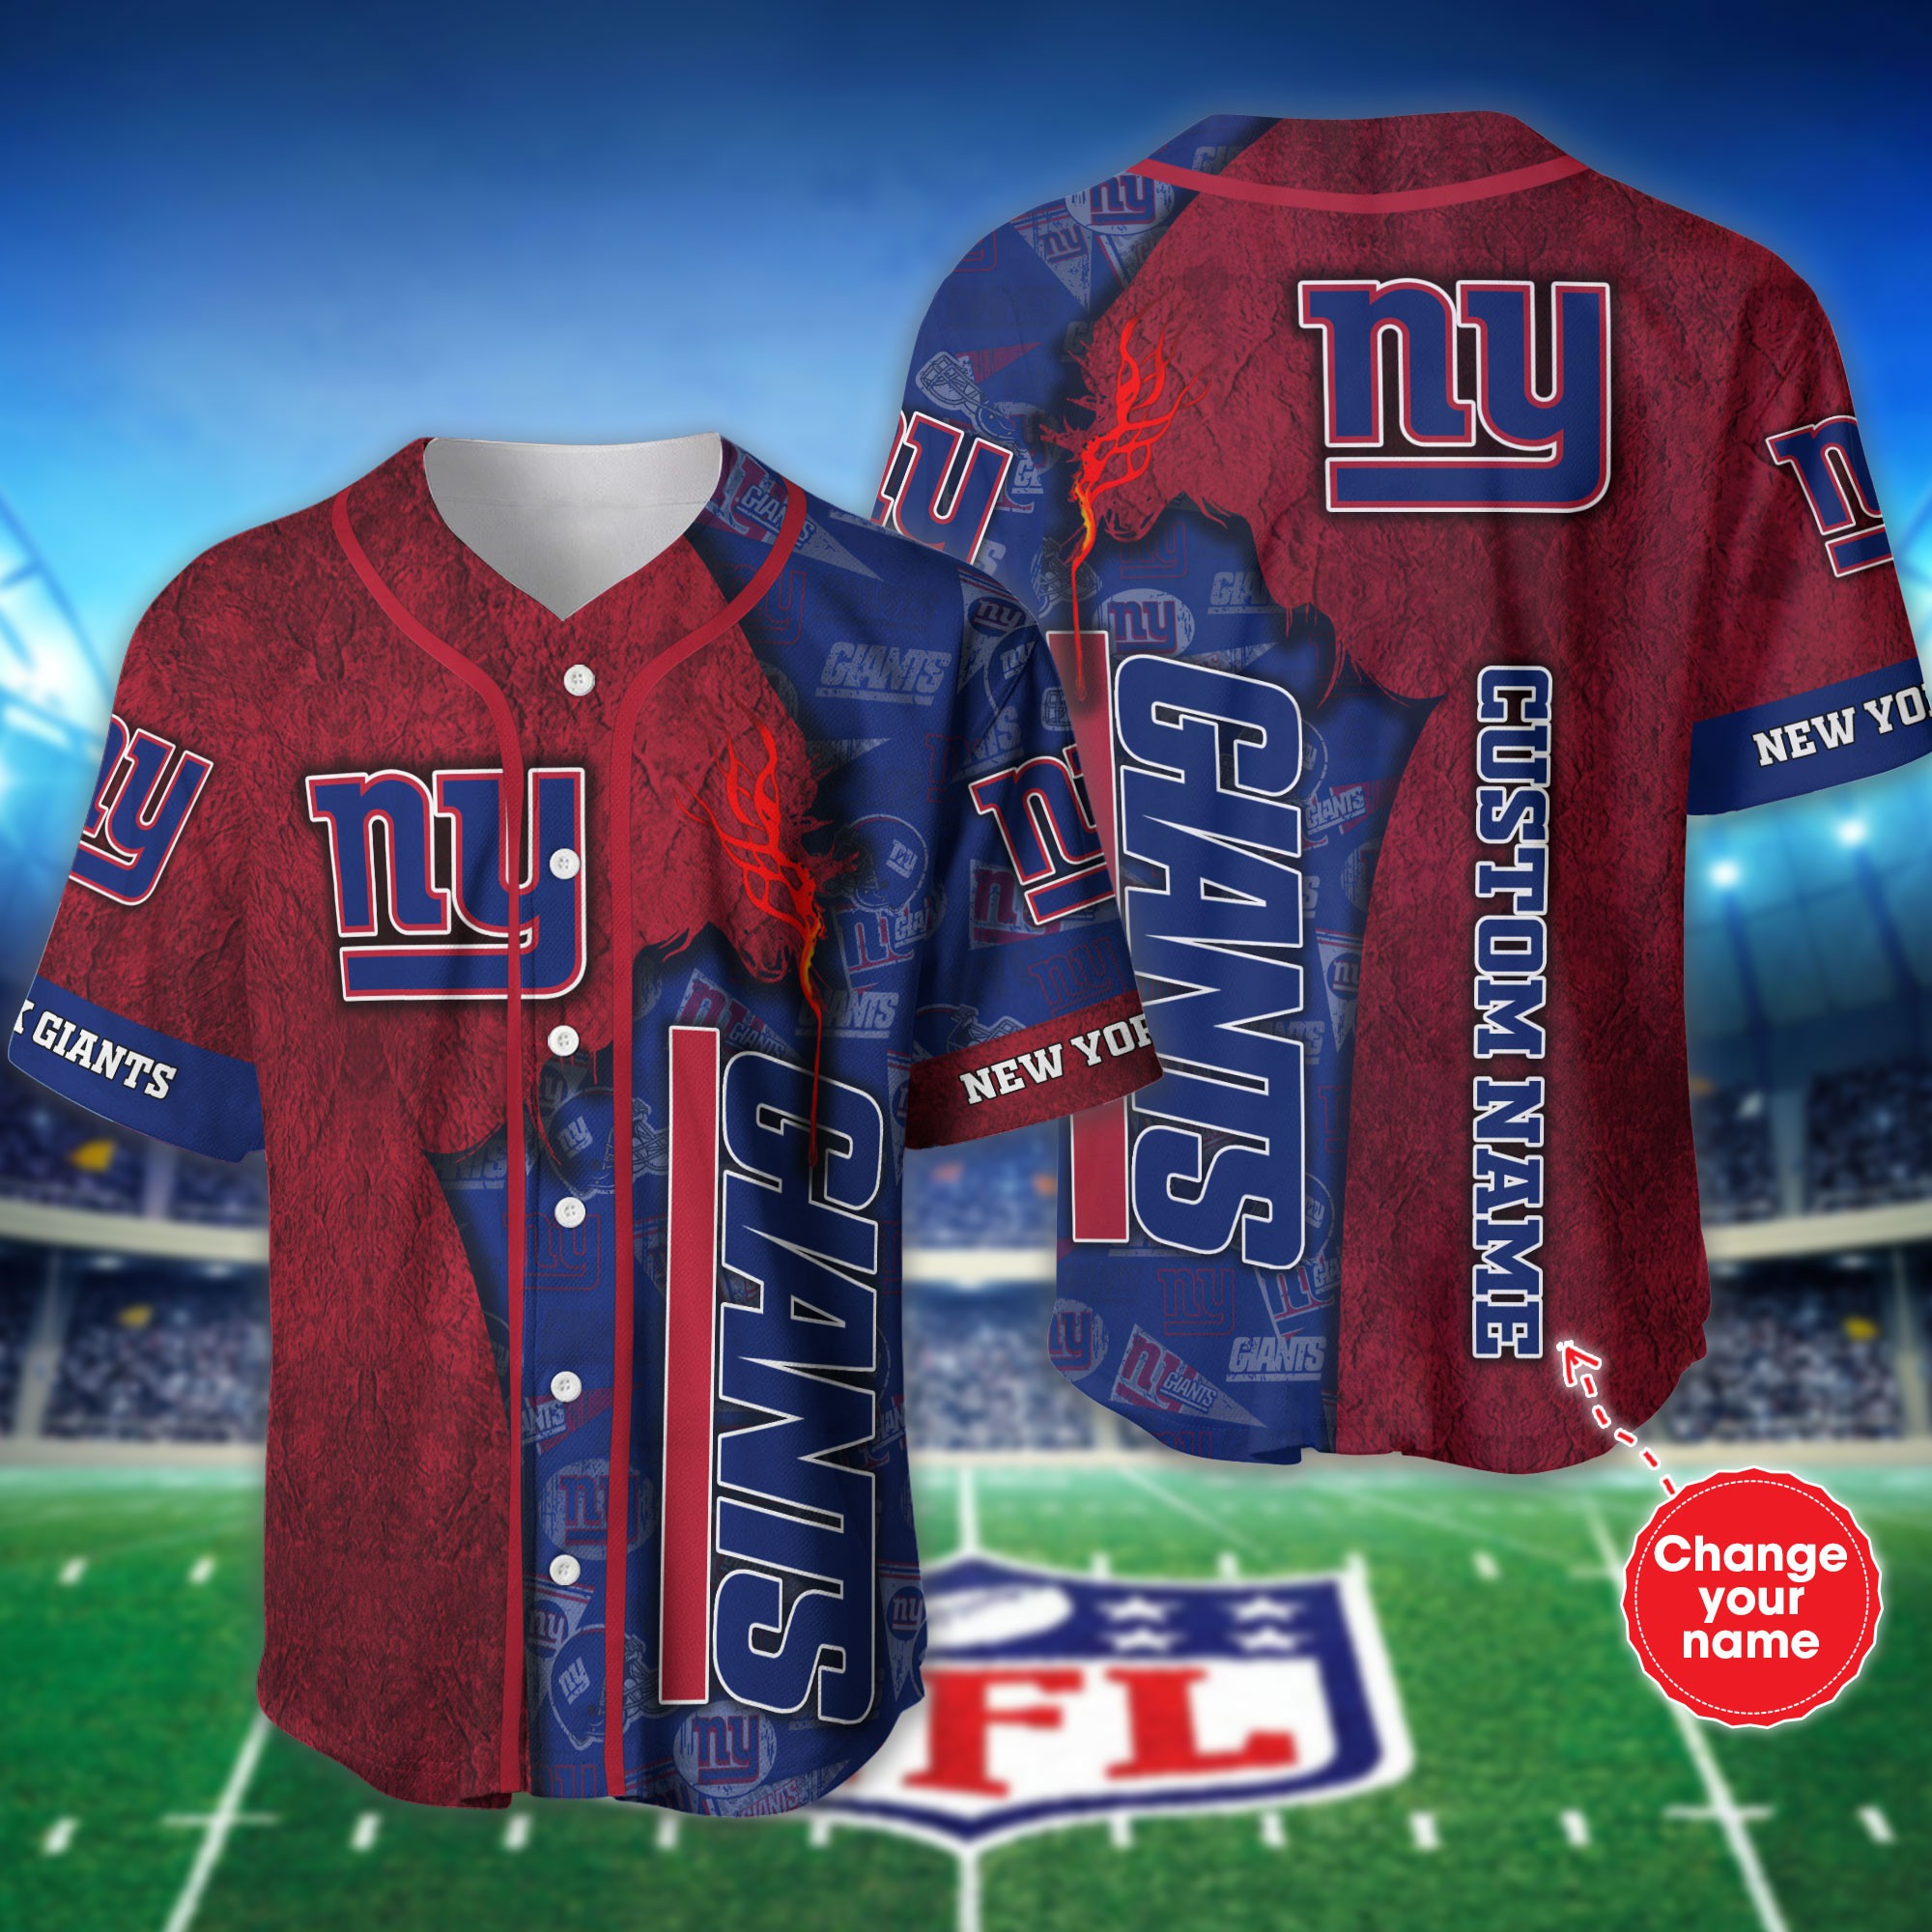 Personalized New York Giants Baseball jersey shirt for fans -Jack sport ...